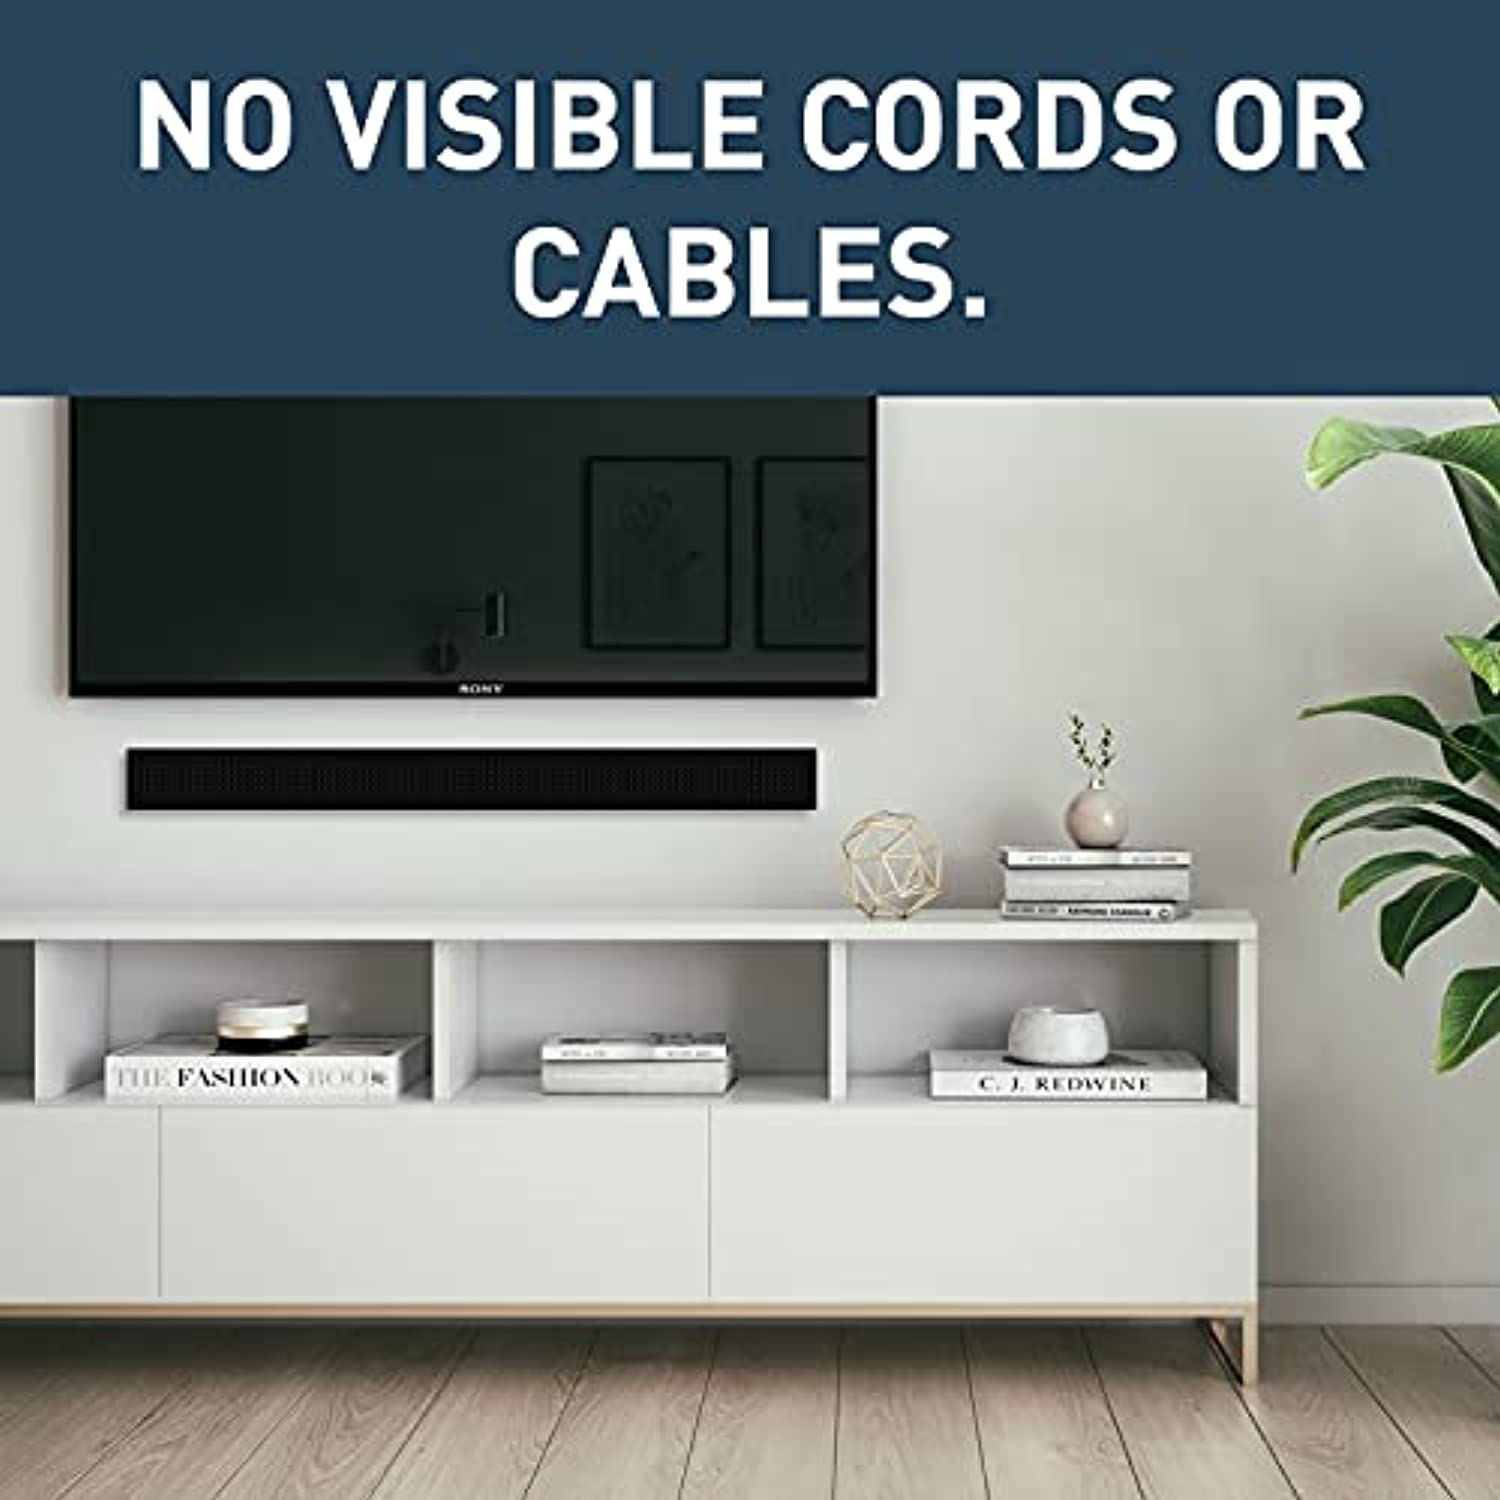 Legrand - WMC801 Wiremold in-Wall TV & Soundbar Power Kit, in Wall Cable Management Kit, TV Cable Hider Wall Kit- White